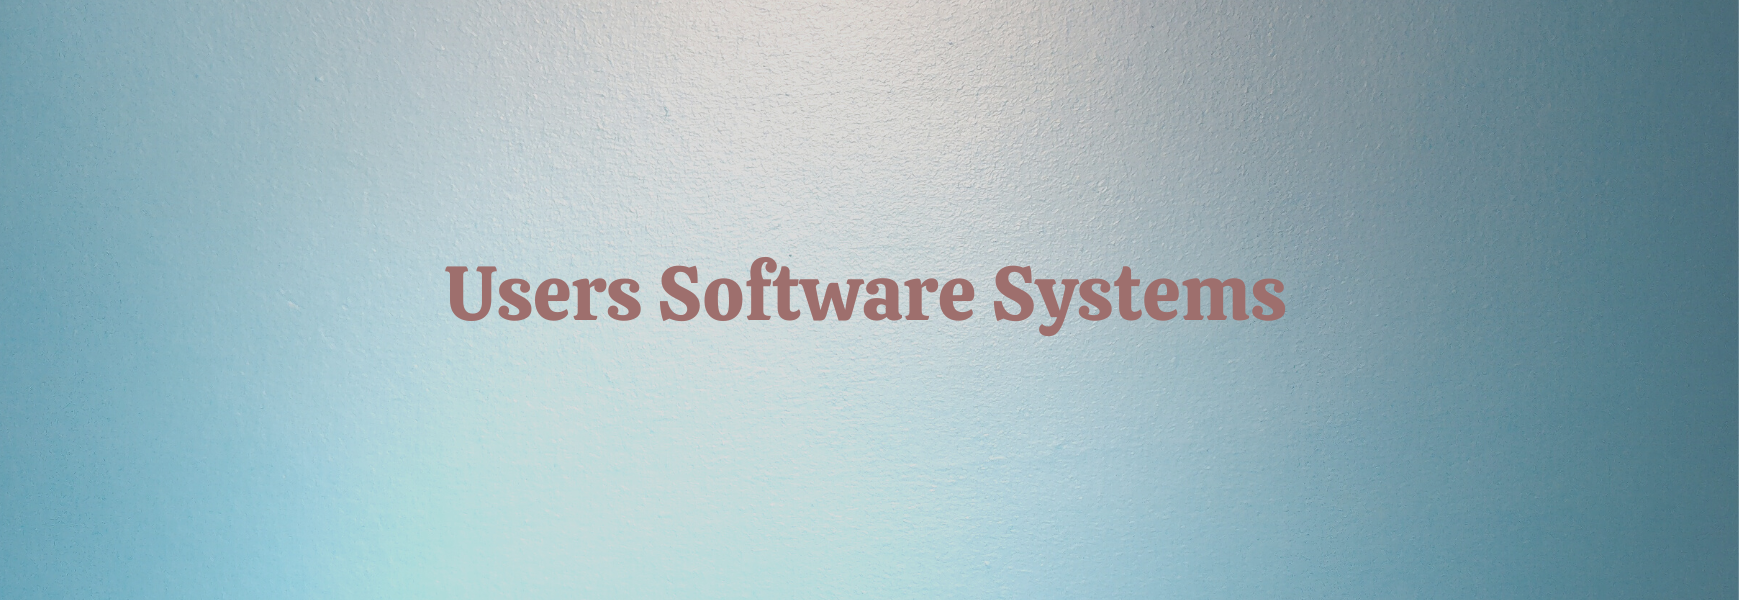 Users Software Systems